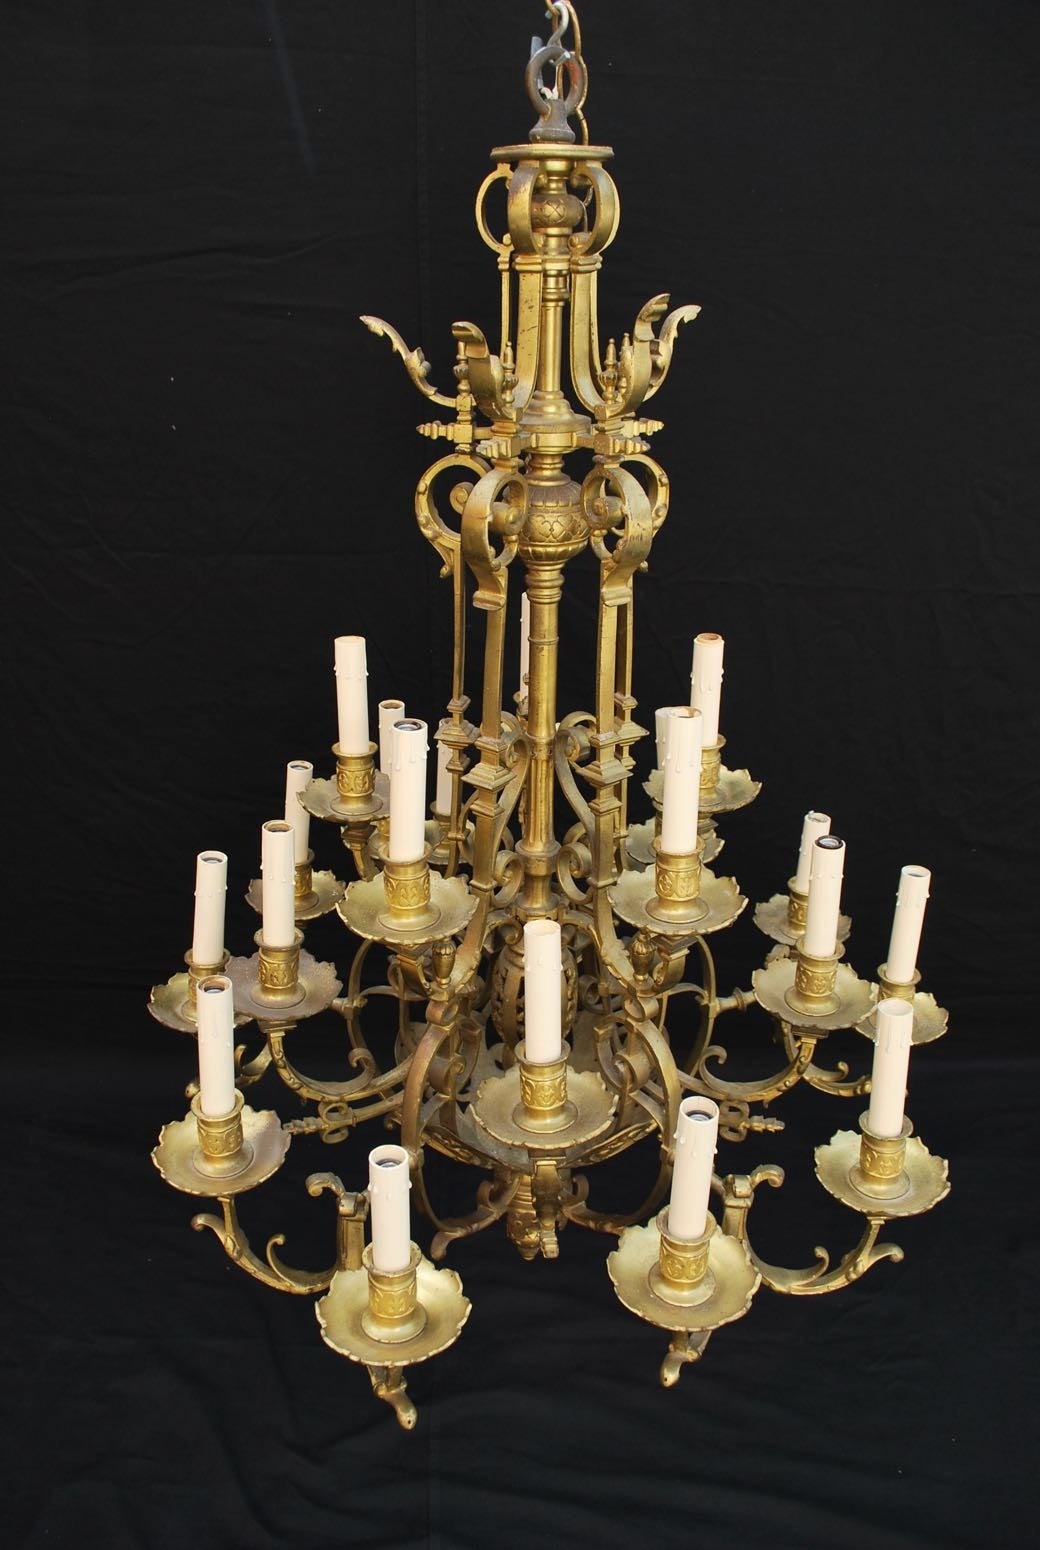 We have over 3000 antique sconces and over 1000 antique lights, if you need a specific pair of sconces or lights, use the 